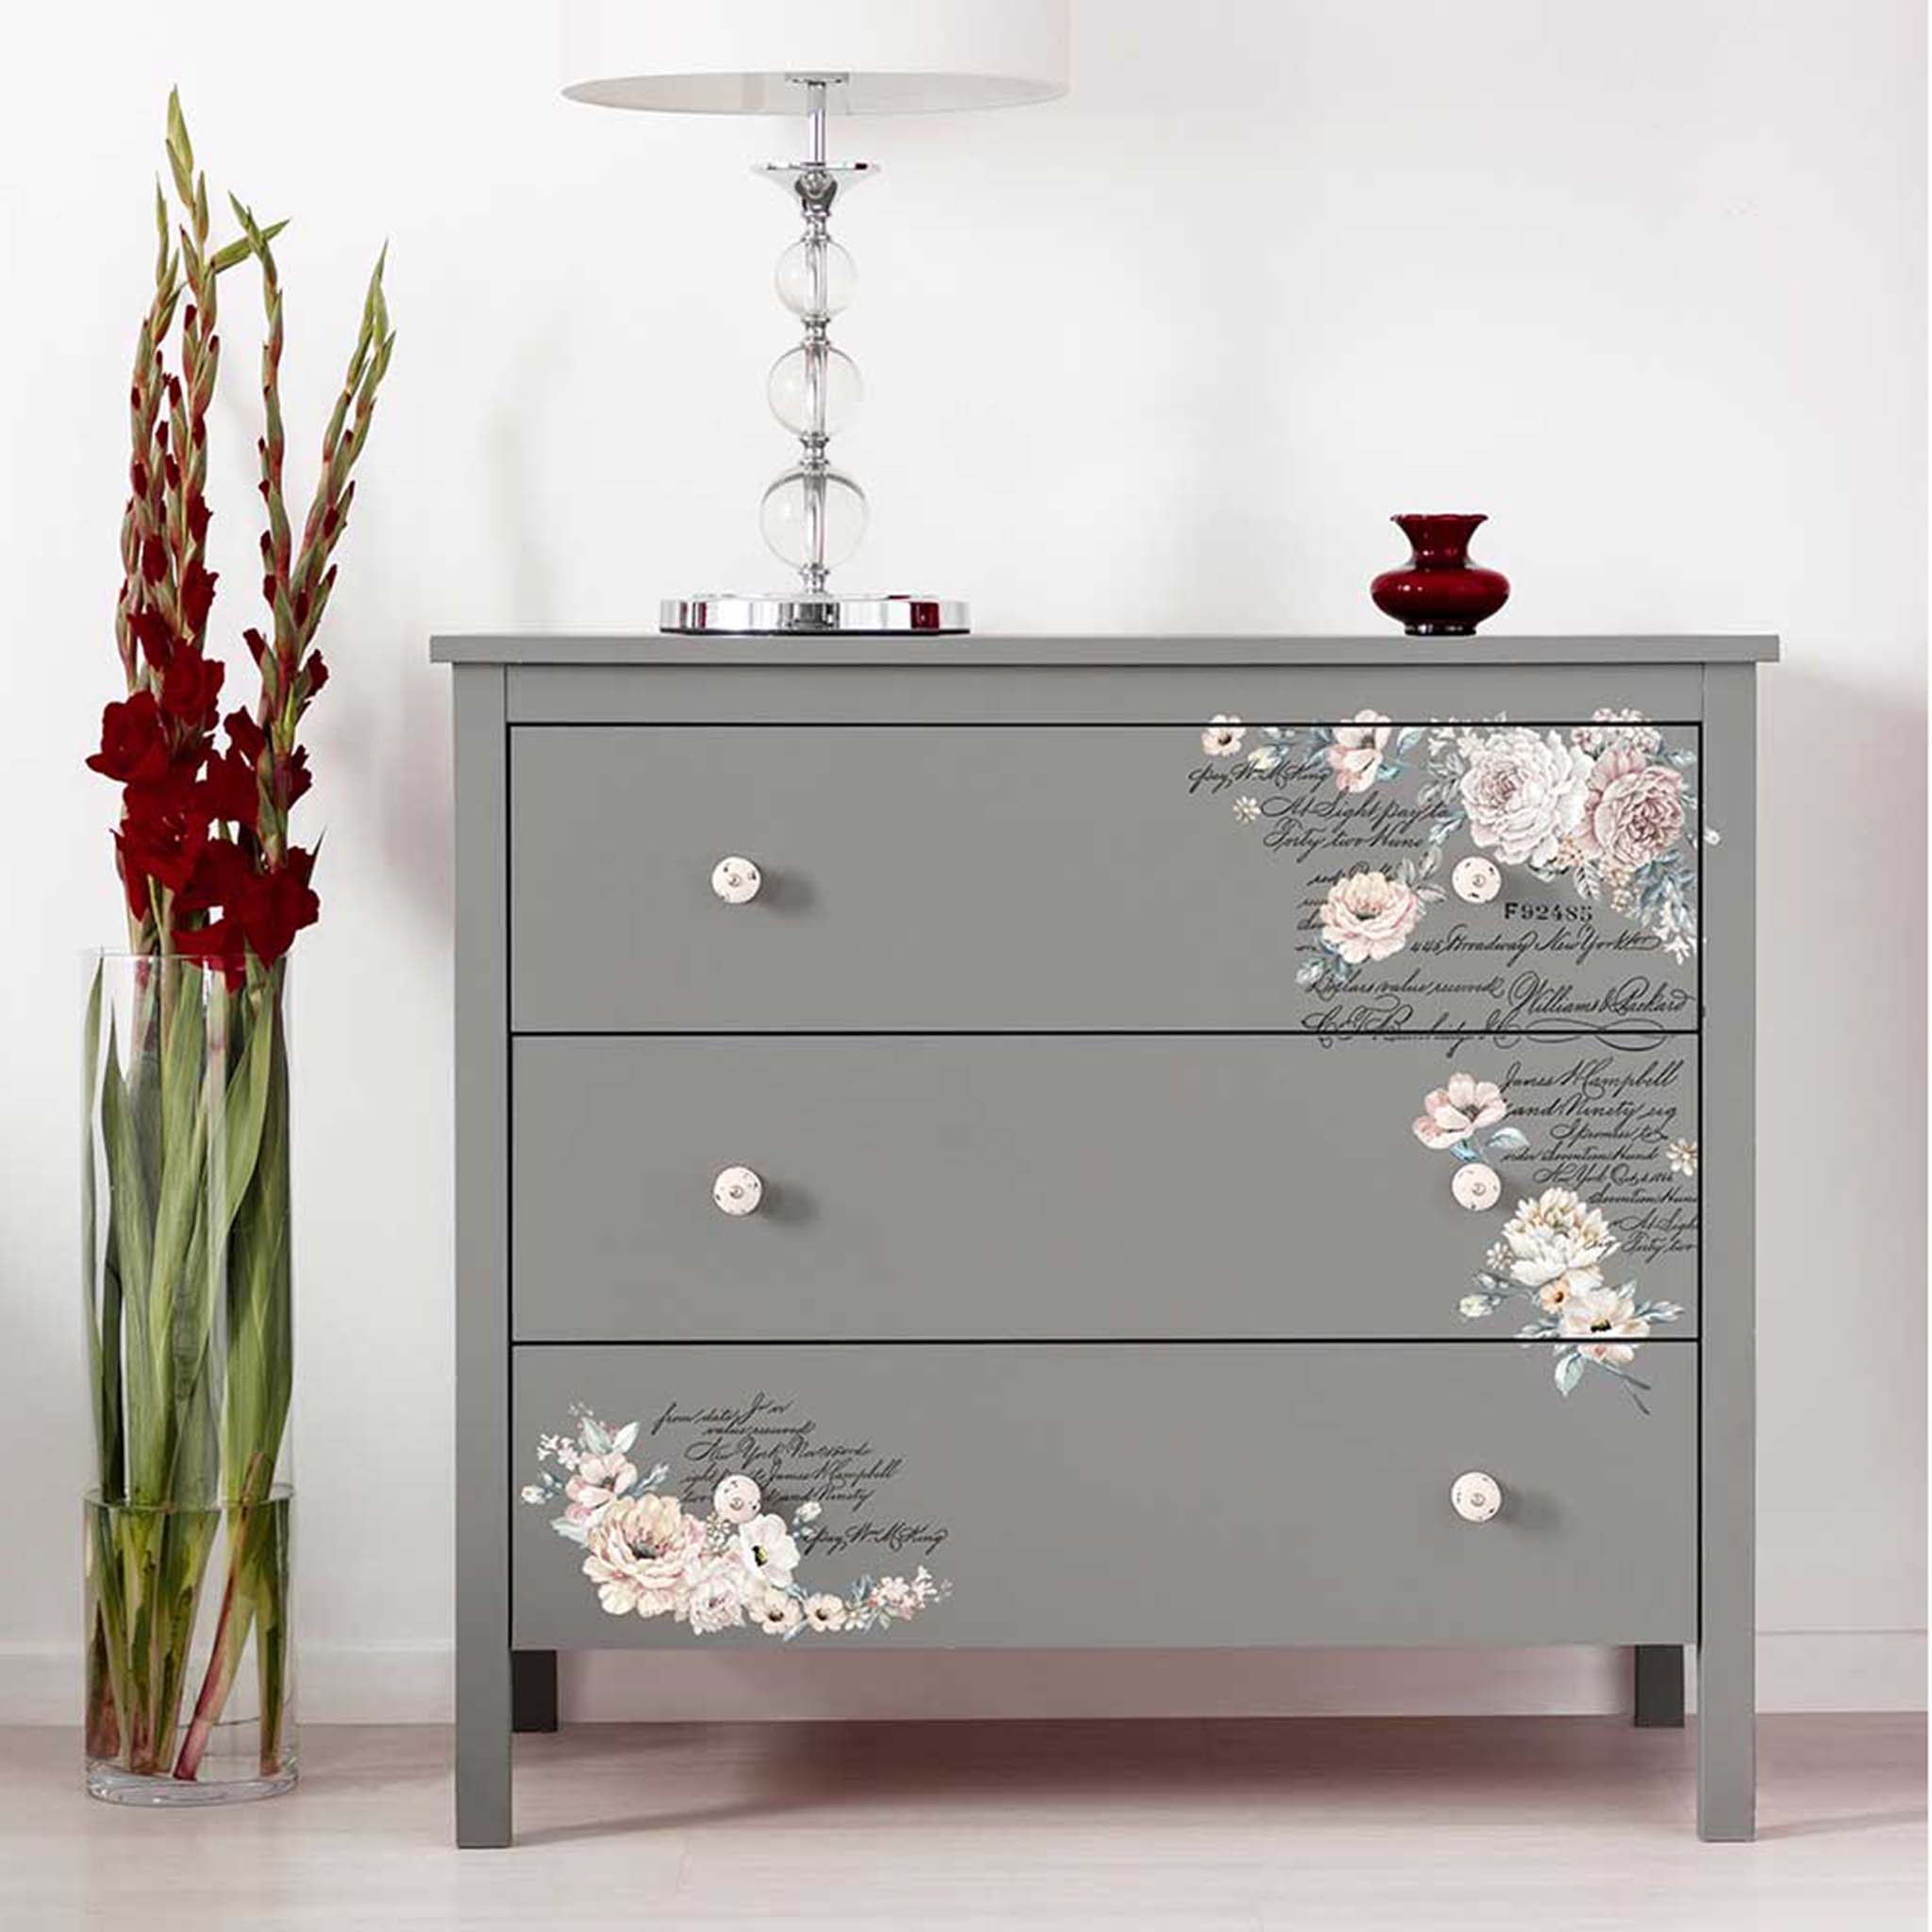 A grey 3-drawer dresser features ReDesign with Prima's Natural Wonders small transfer on the bottom left and top right corners of the top and bottom drawers.